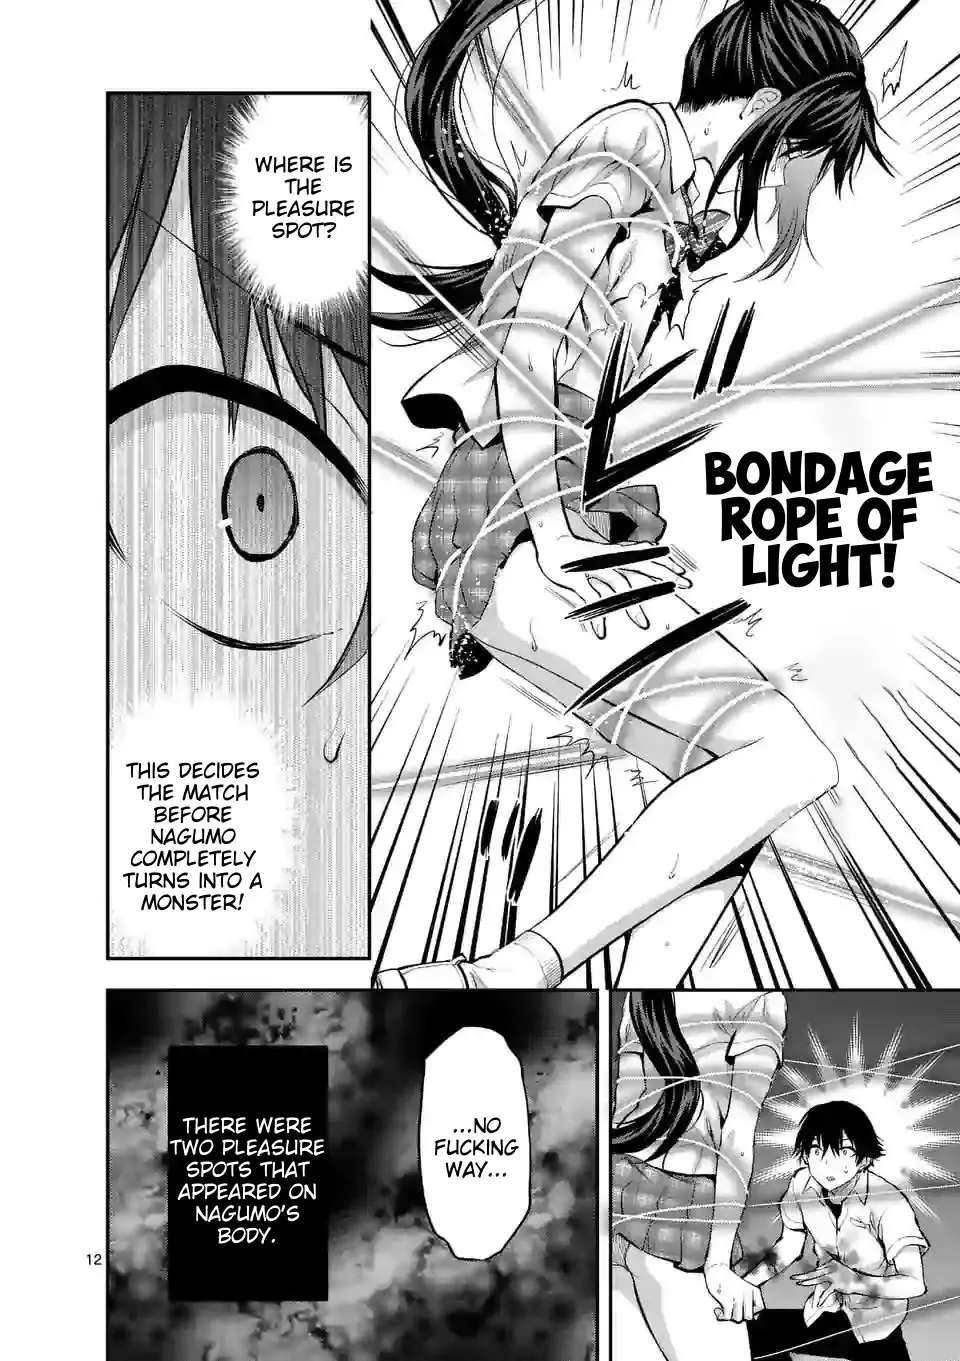 Climax Exorcism With A Single Touch! - 16 page 12-ba1a2b2d